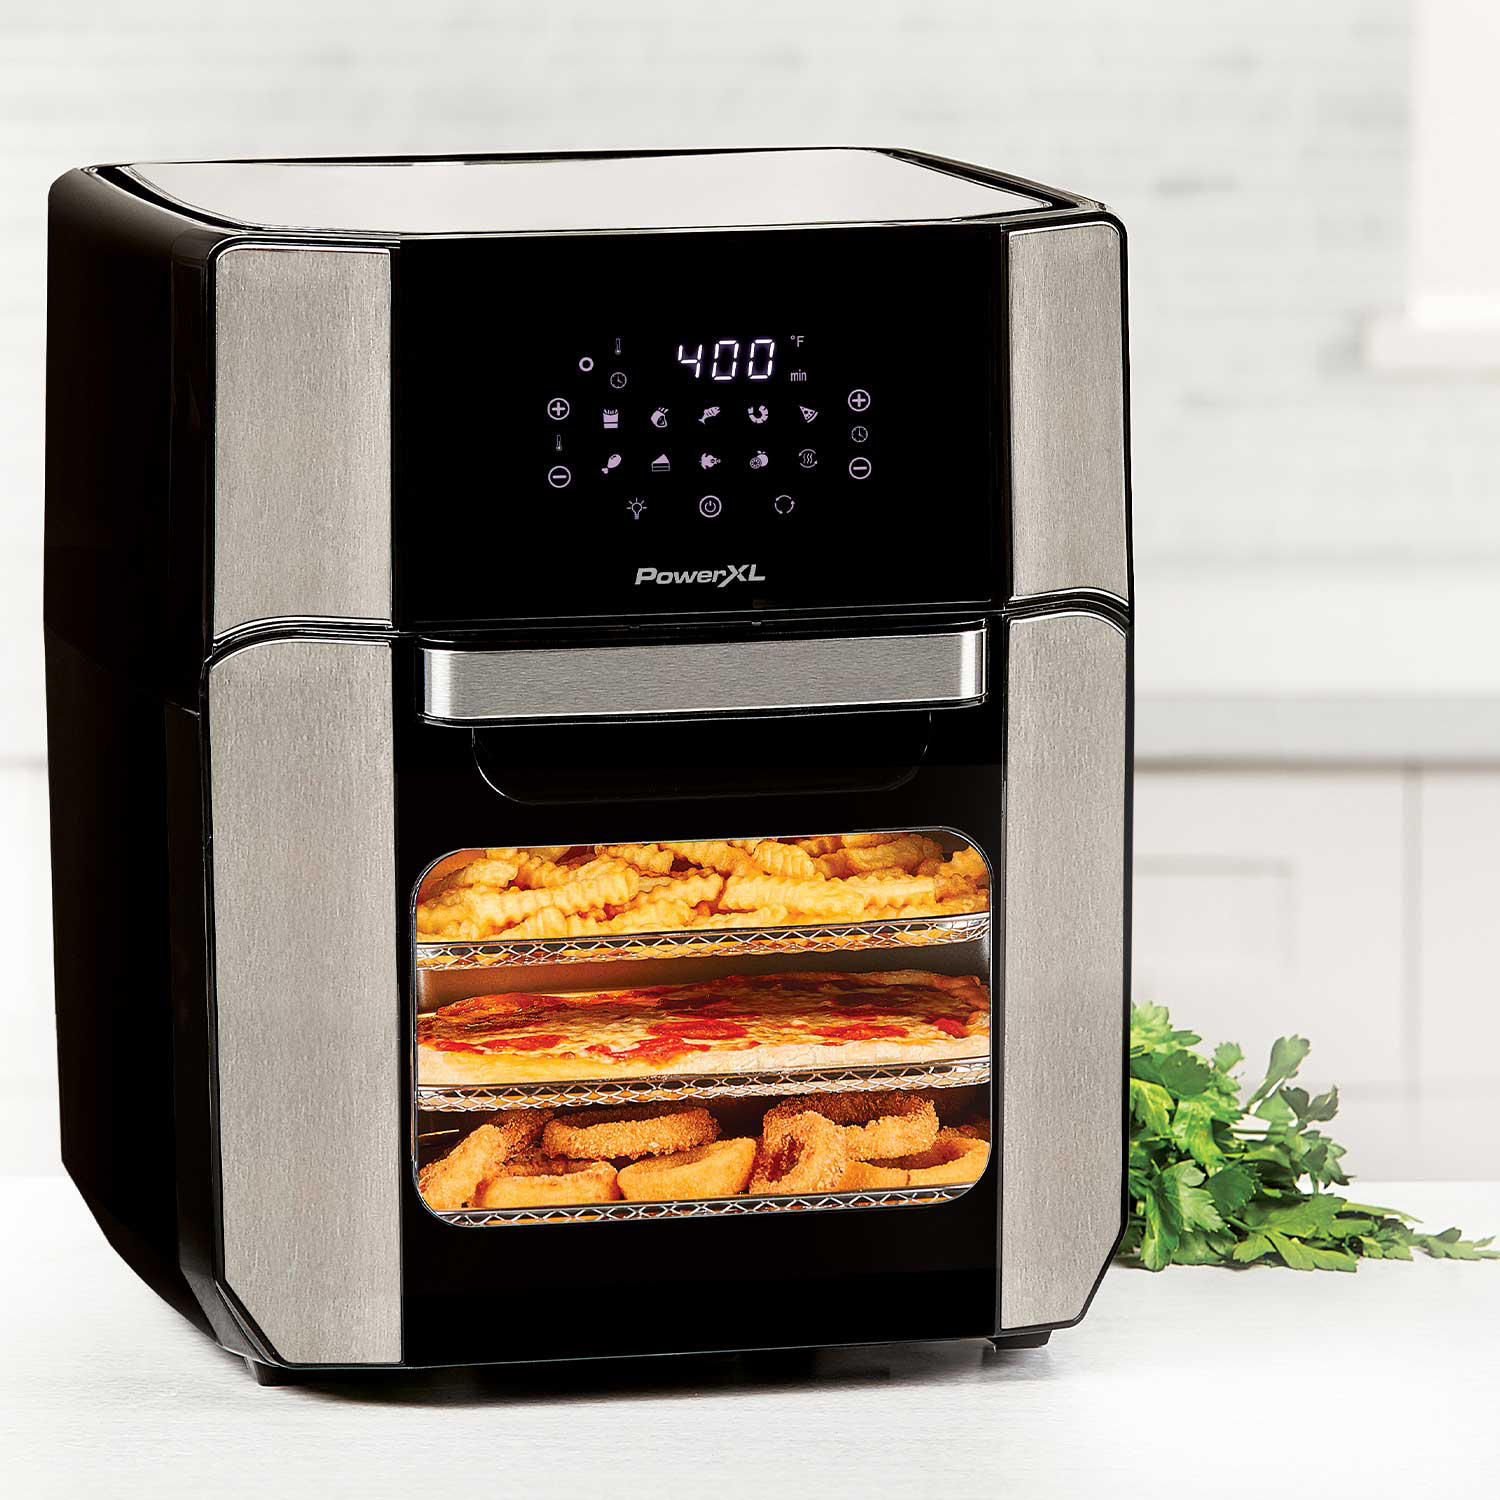  PowerXL 4-in-1 Versa Chef Air Fryer, Oven, Bread Maker, Slow  Cooker, with 25 Cooking Presets, Black : Home & Kitchen